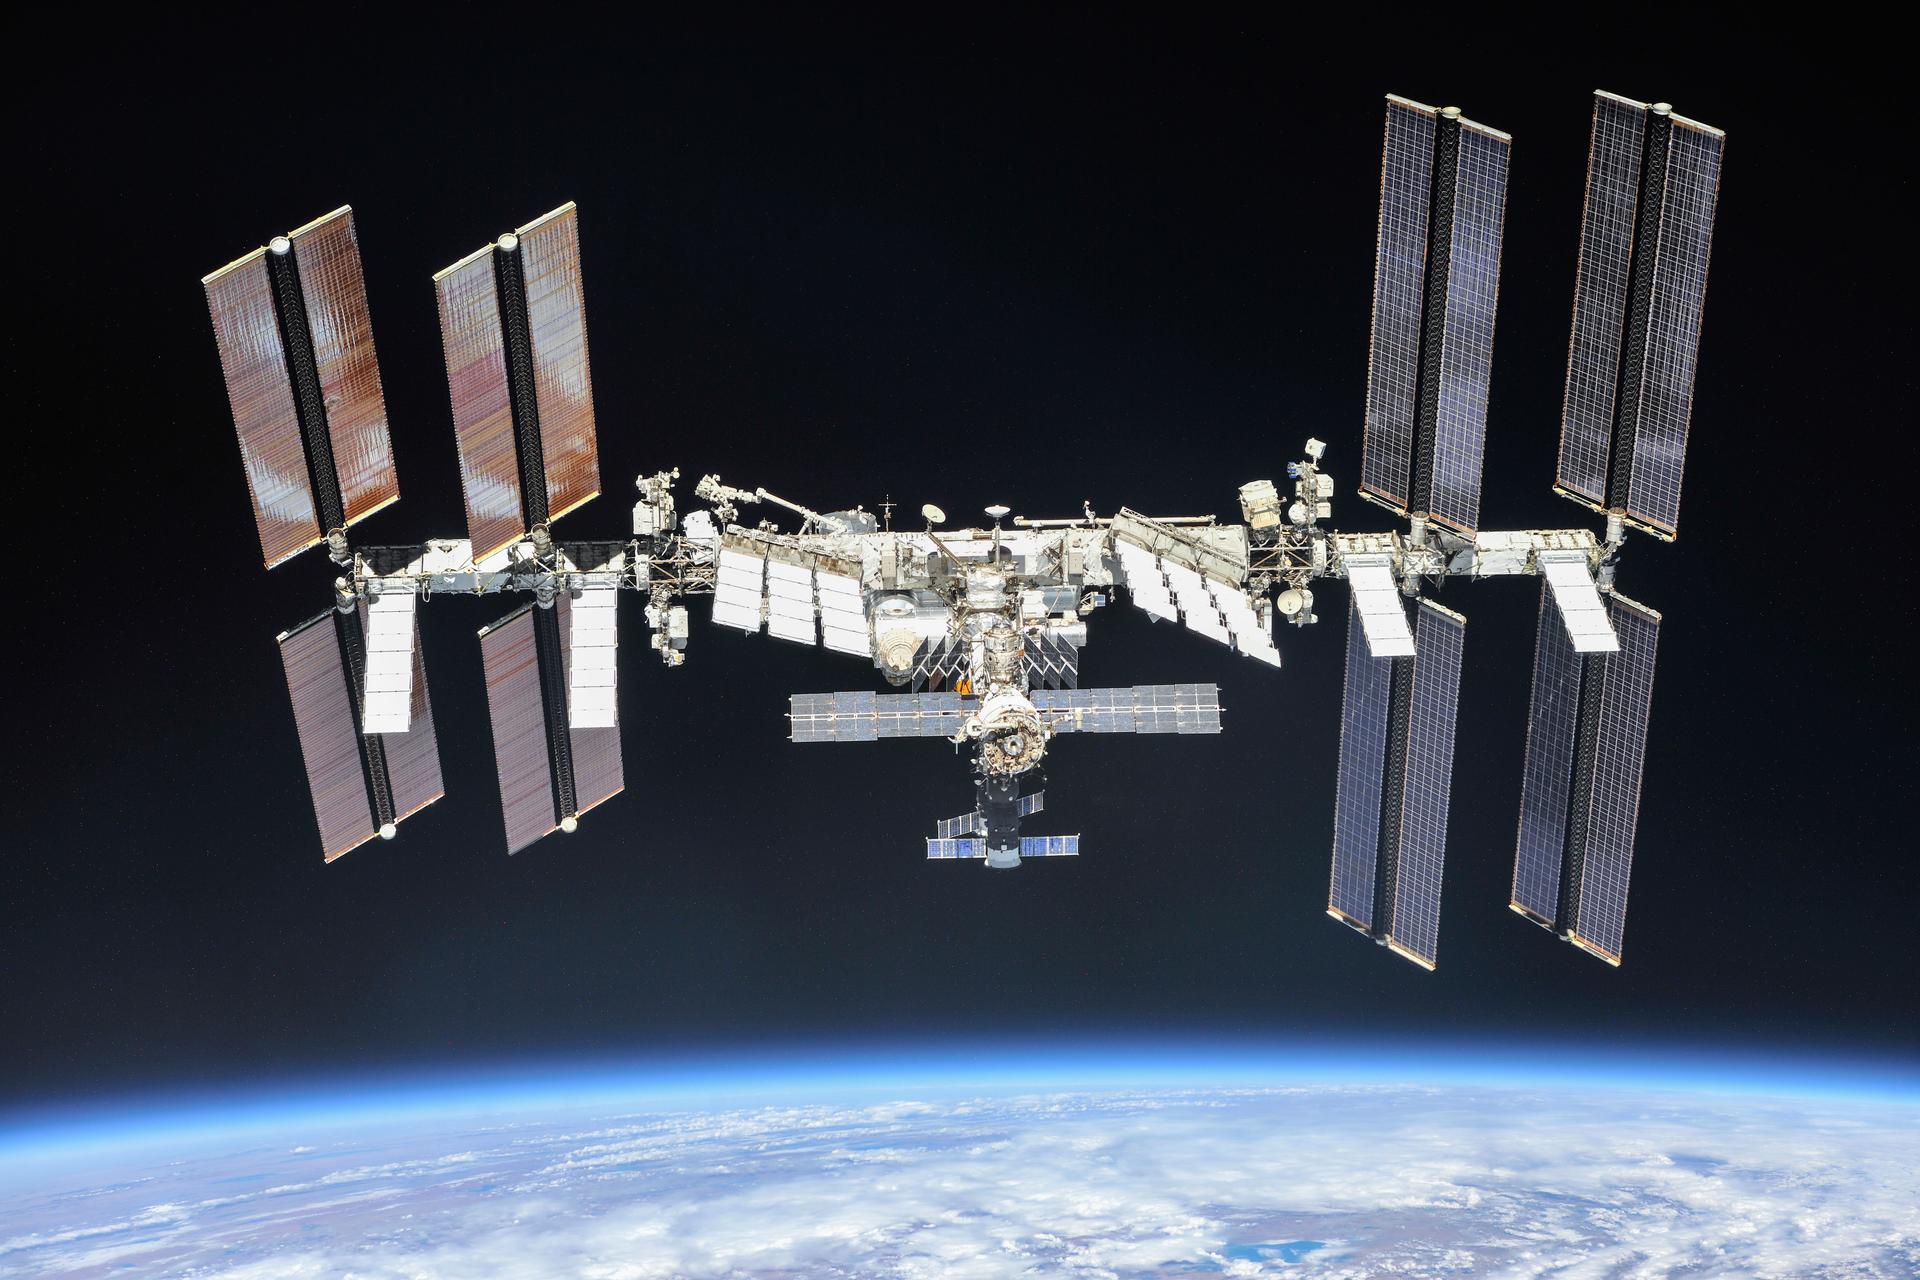 The International Space Station photographed by Expedition 56 crew members from a Soyuz spacecraft after undocking. 